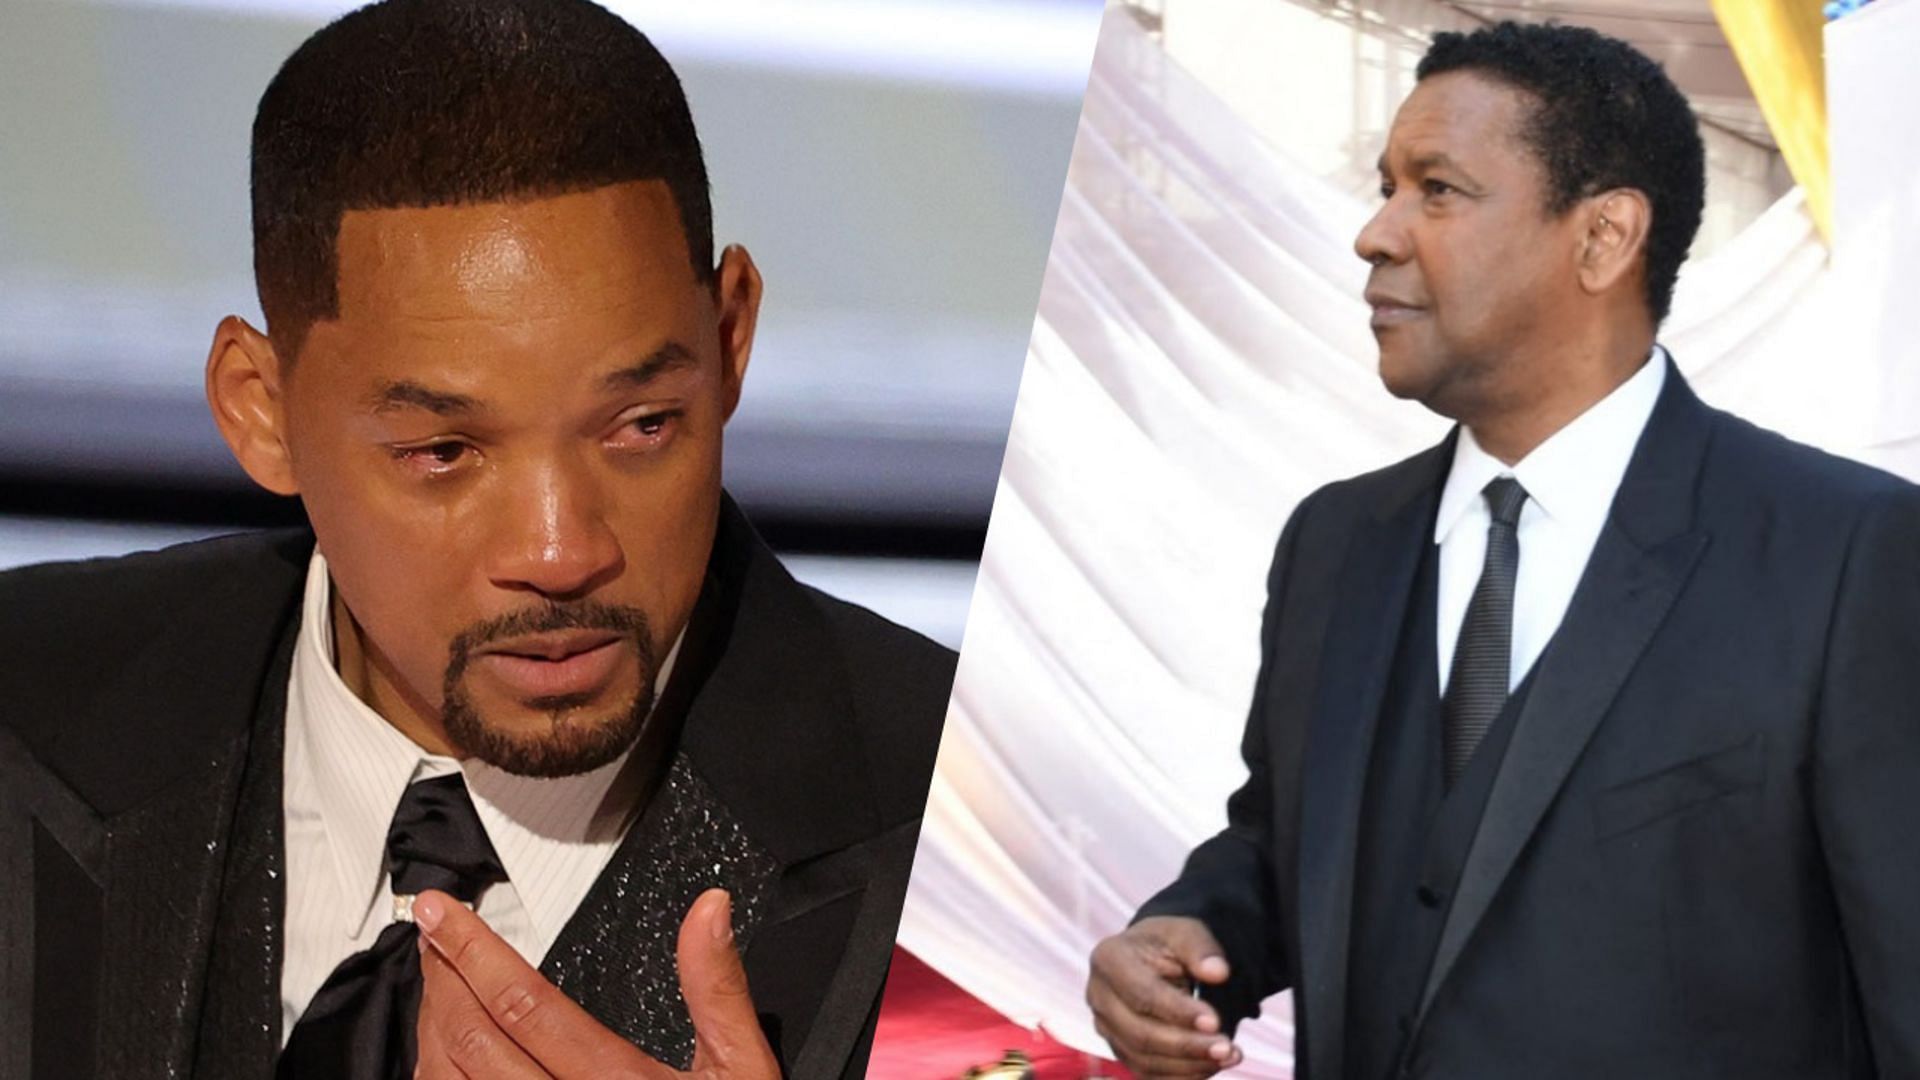 Denzel Washington expresses his opinions about Will Smith&#039;s Oscars 2022 slap (Image via Neilson Barnard/Getty Images &amp; Valerie Macon/AFP/Getty Images)